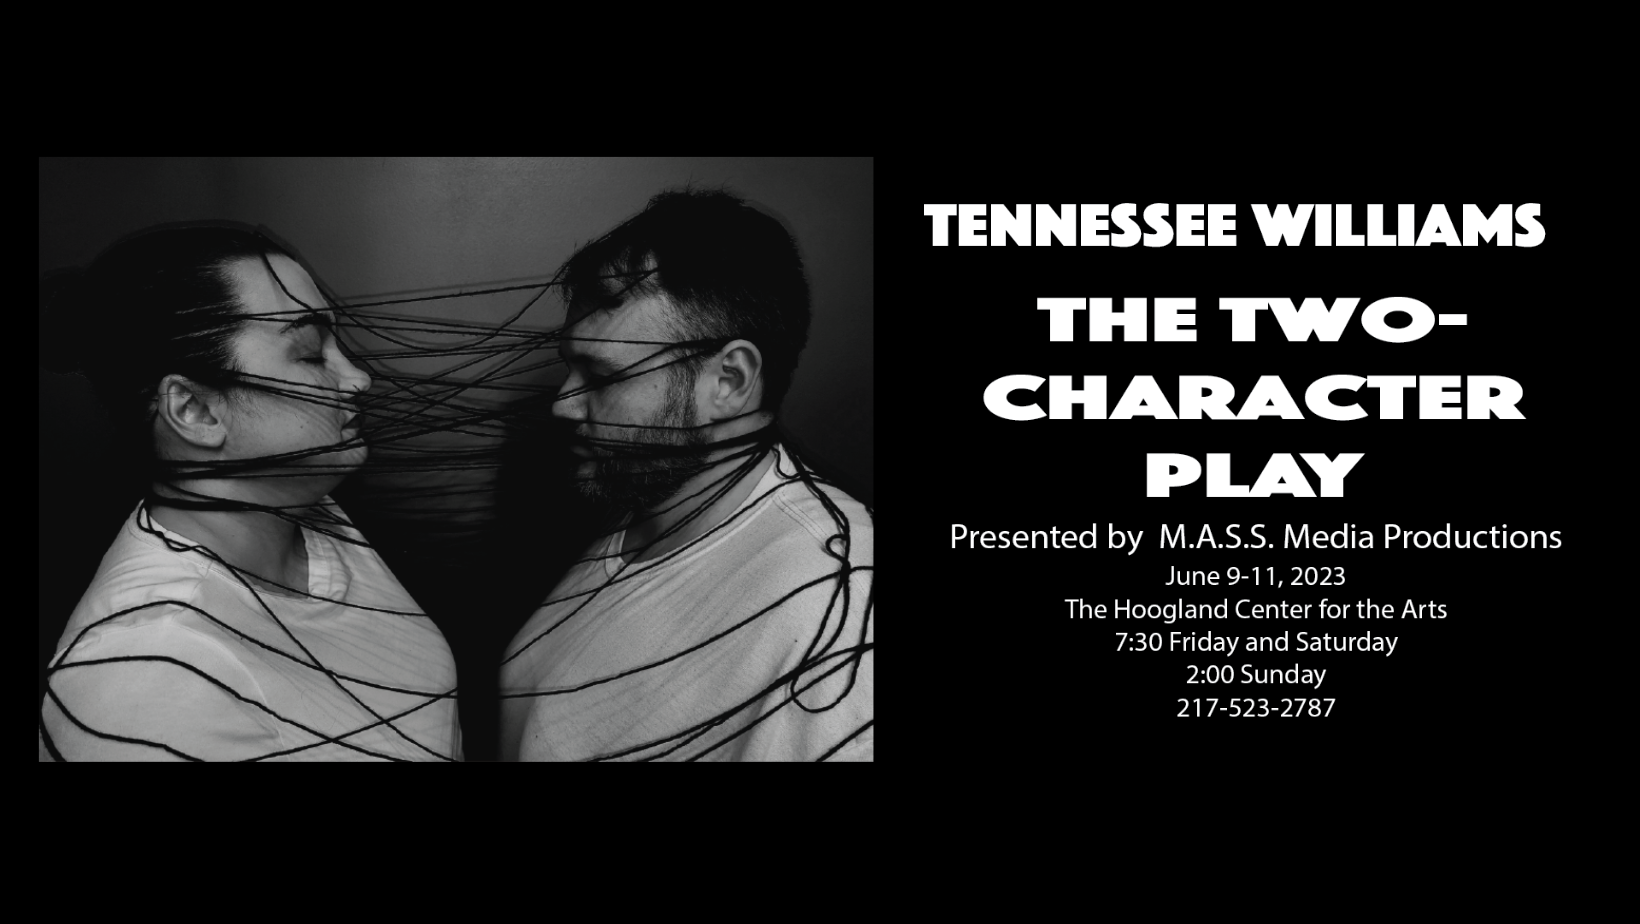 MASS Media presents Tennessee Williams The Two - Character Play